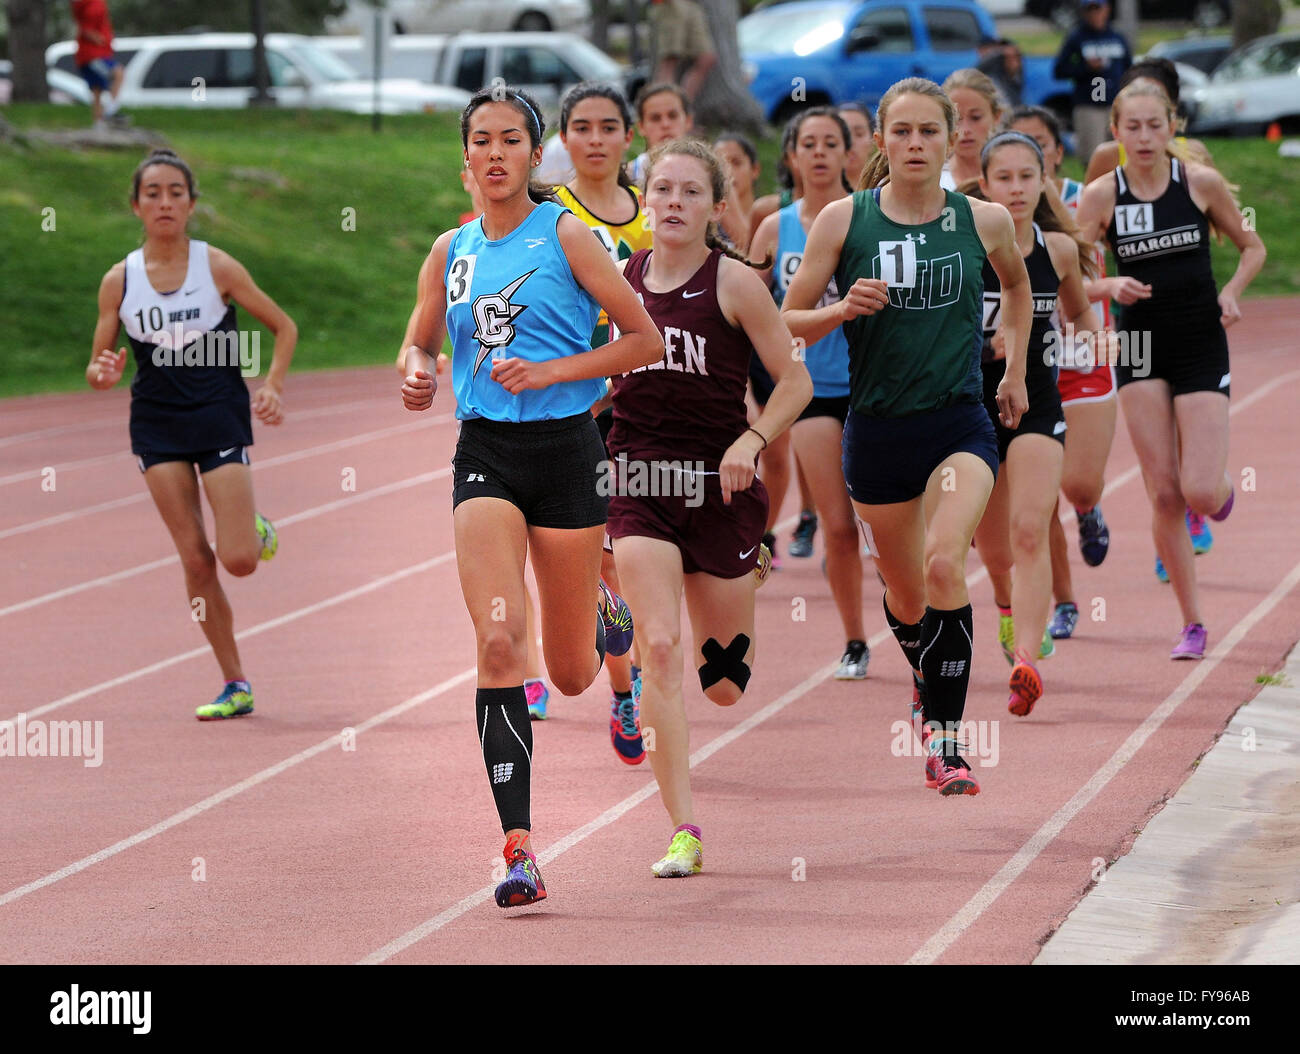 Albuquerque, NM, USA. 23rd Apr, 2016. Cleveland's Amanda Mayoral was the leader of the pack in the entire race of the girls 1600 meter run at the Richard Harper track Meet. Saturday, April. 23, 2016. © Jim Thompson/Albuquerque Journal/ZUMA Wire/Alamy Live News Stock Photo